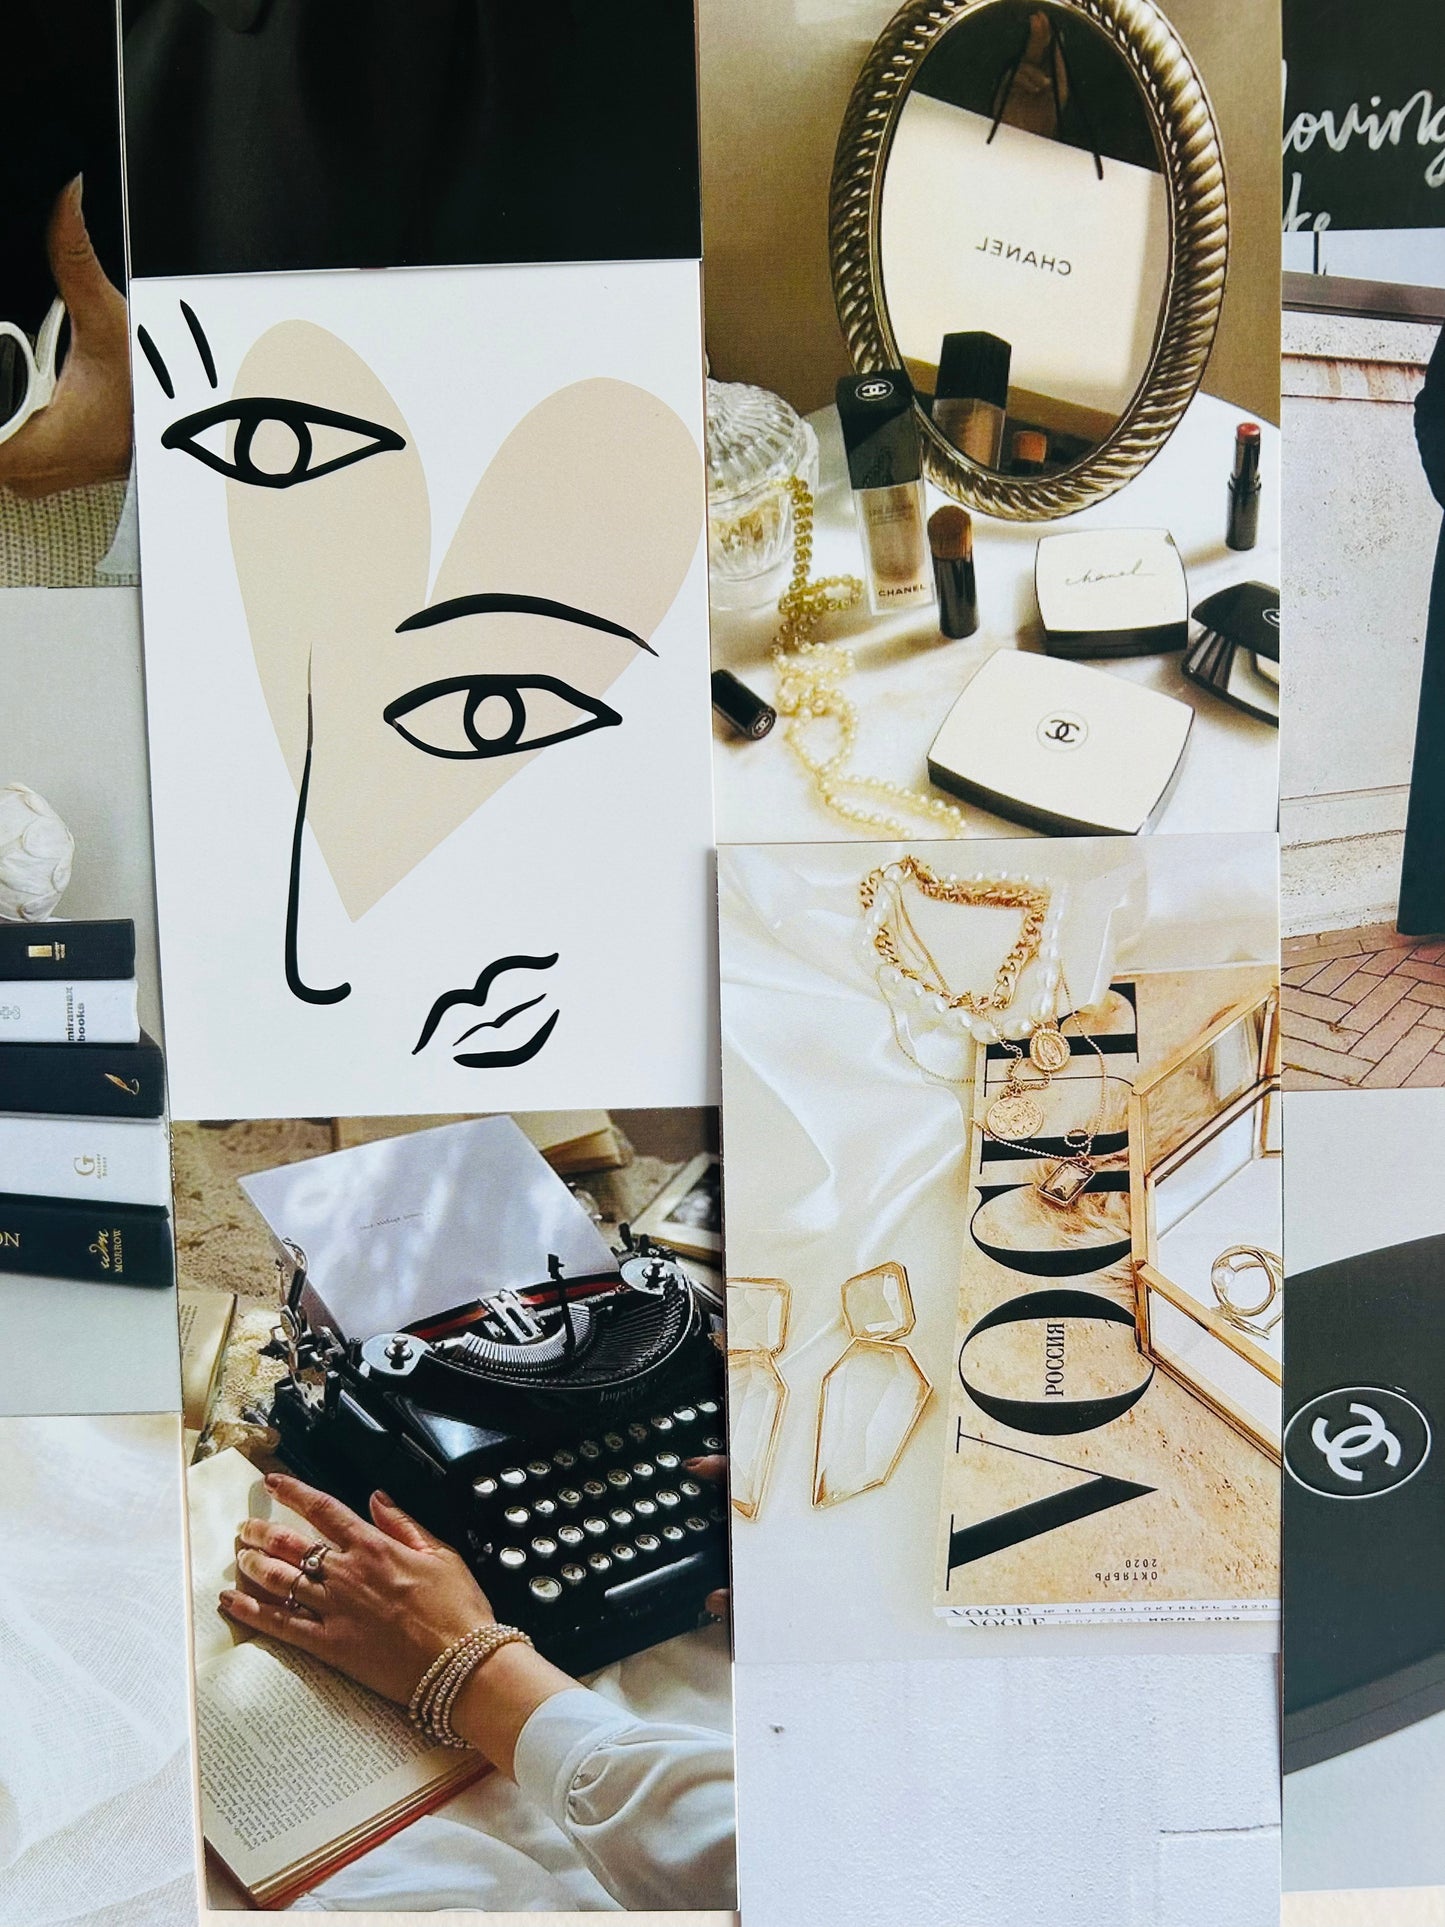 The Glam Grid Collage Kit